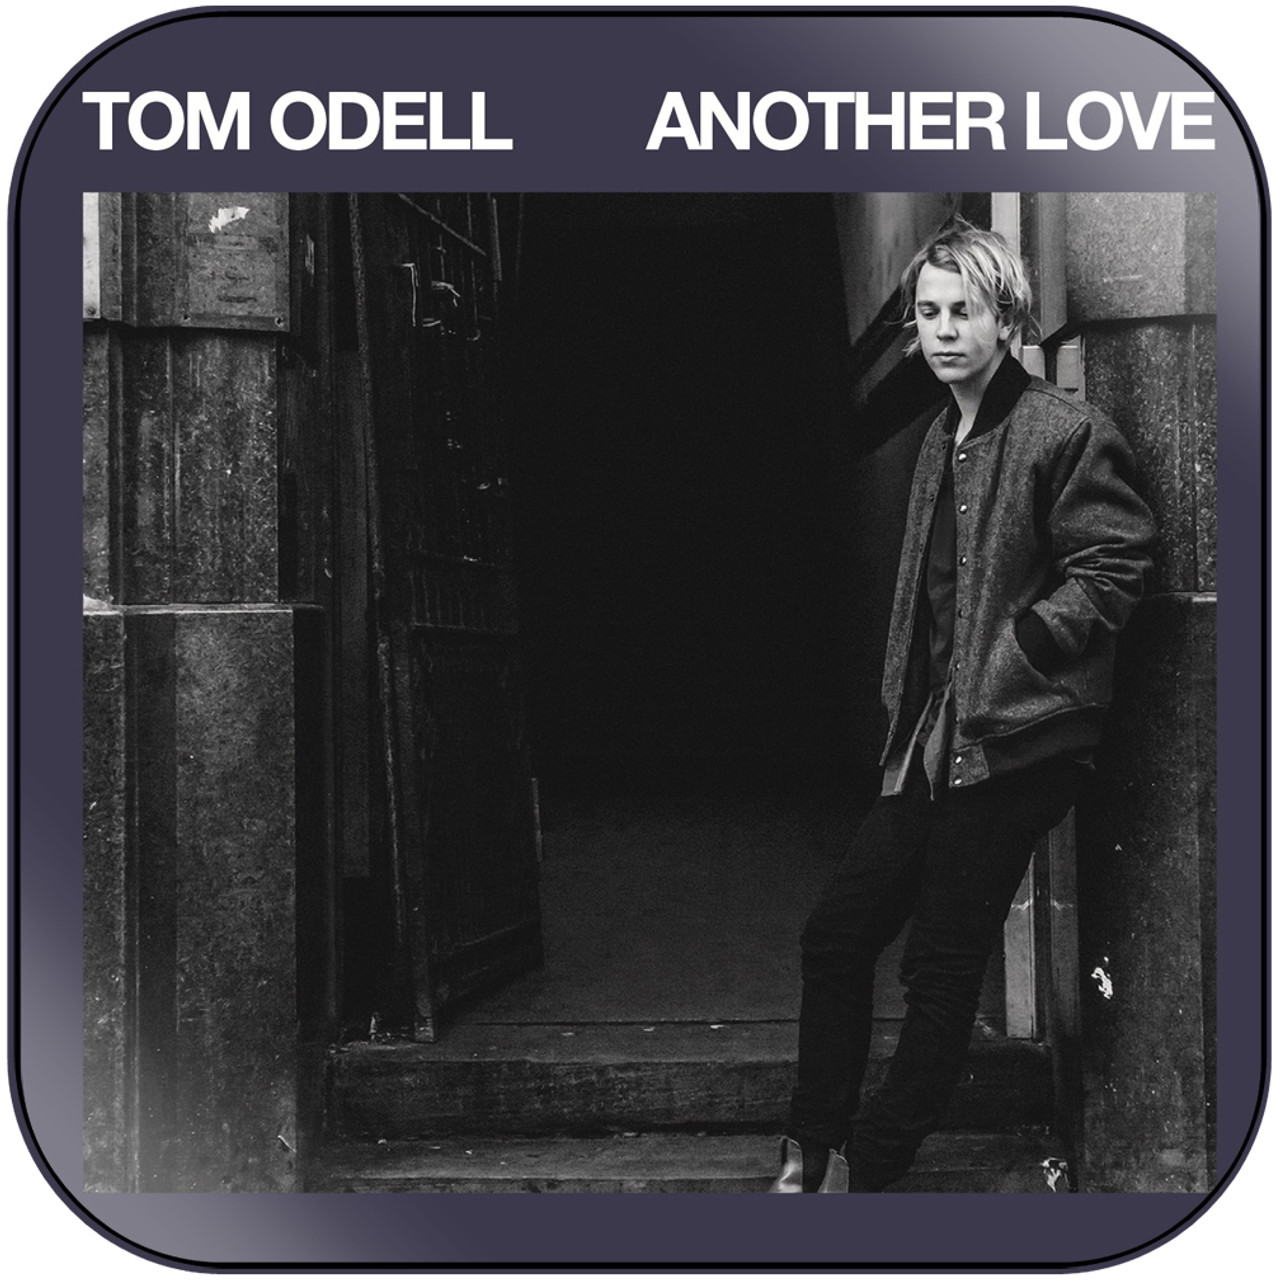 Another love tom odell на русский. Tom Odell обложка. Another Love том Оделл. Tom Odell Love. Tom Odell обложка альбома.